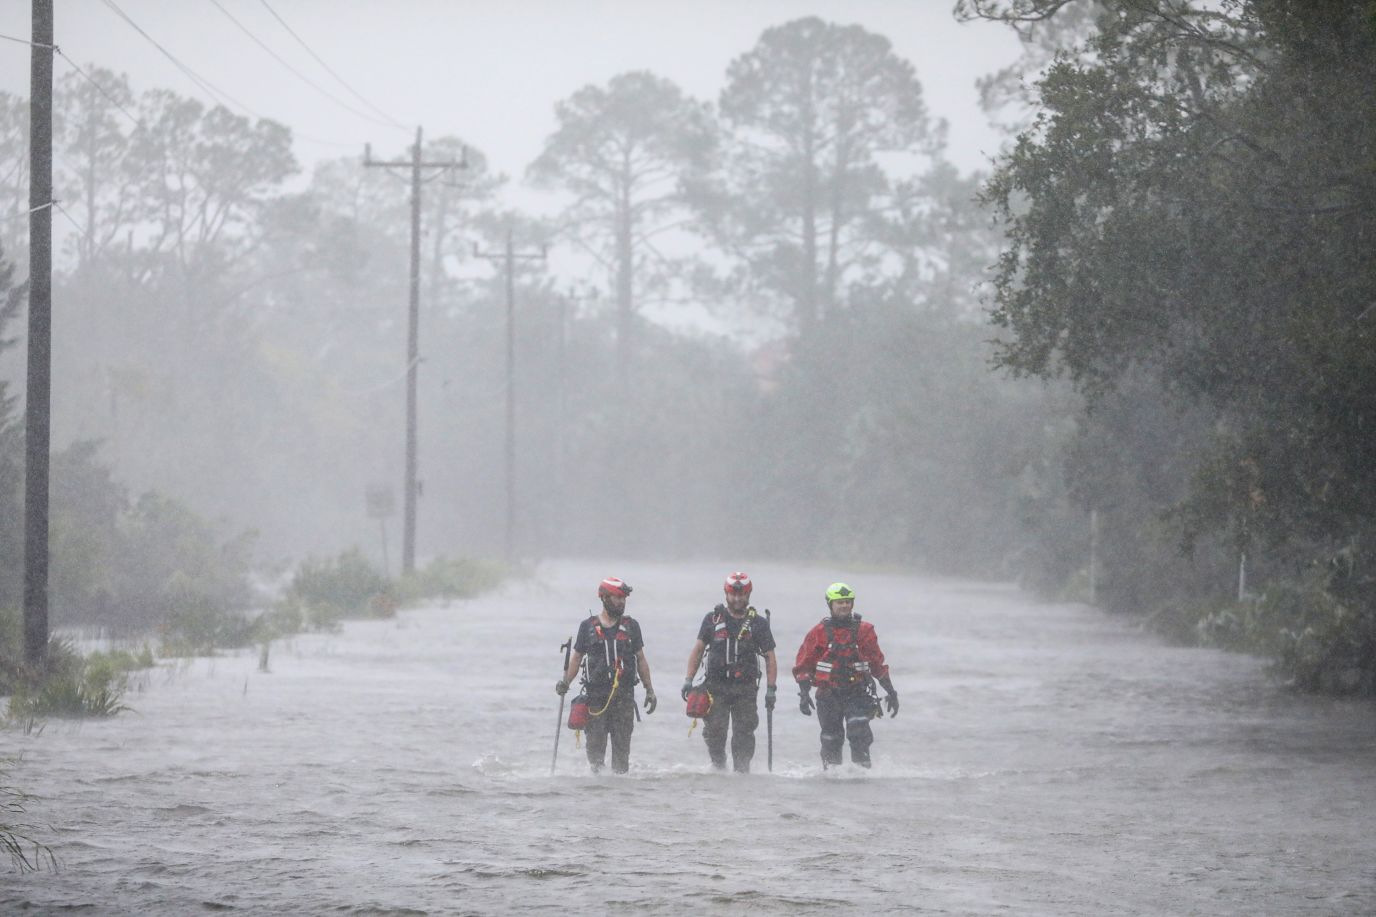 Three workers walk up a road that has been flooded with water.